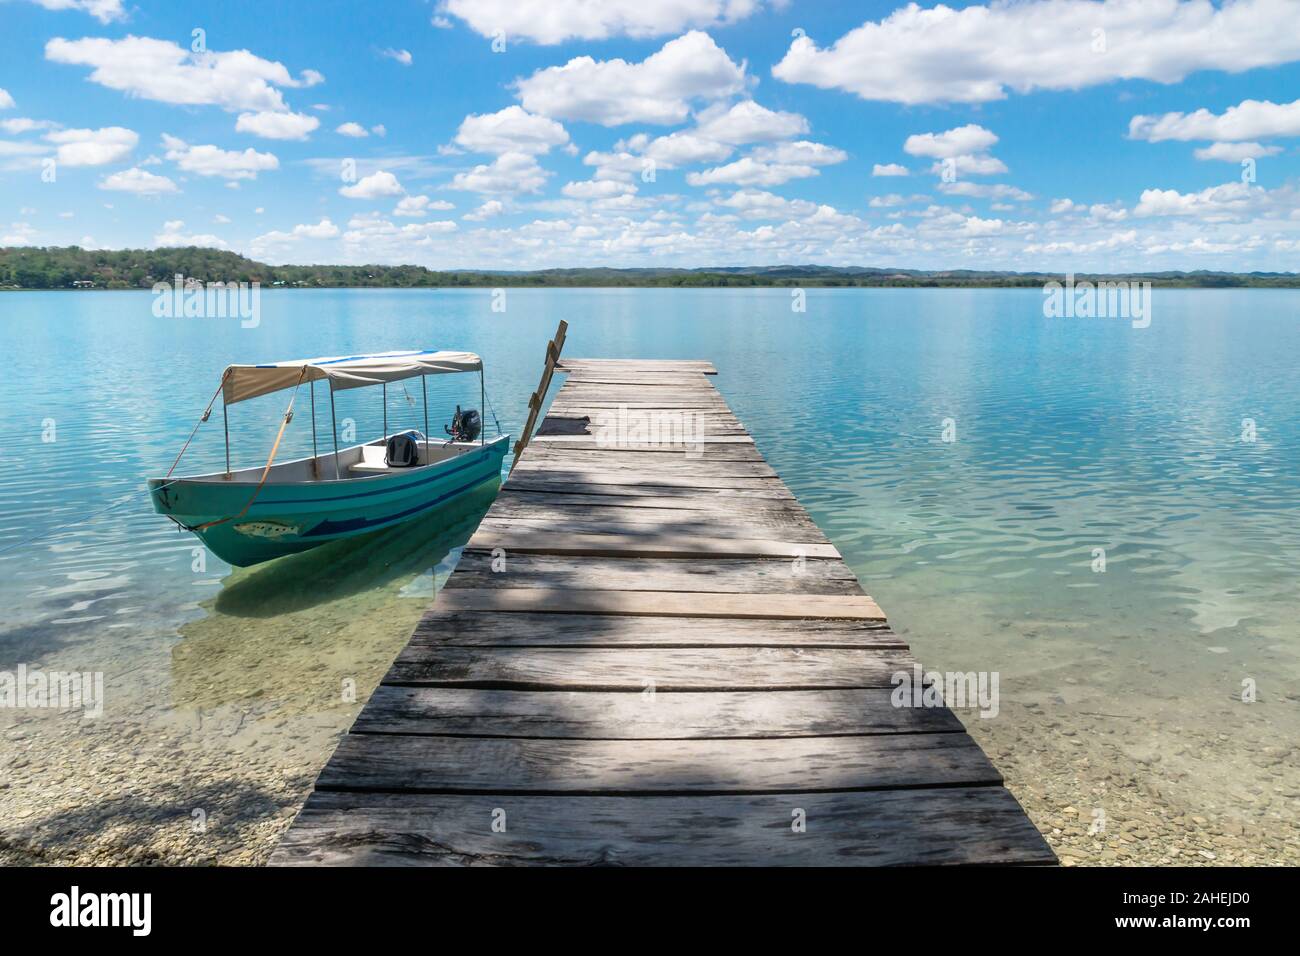 Boat at a wooden dock at lake Itza with turquoise water, El Remate, Peten, Guatemala Stock Photo